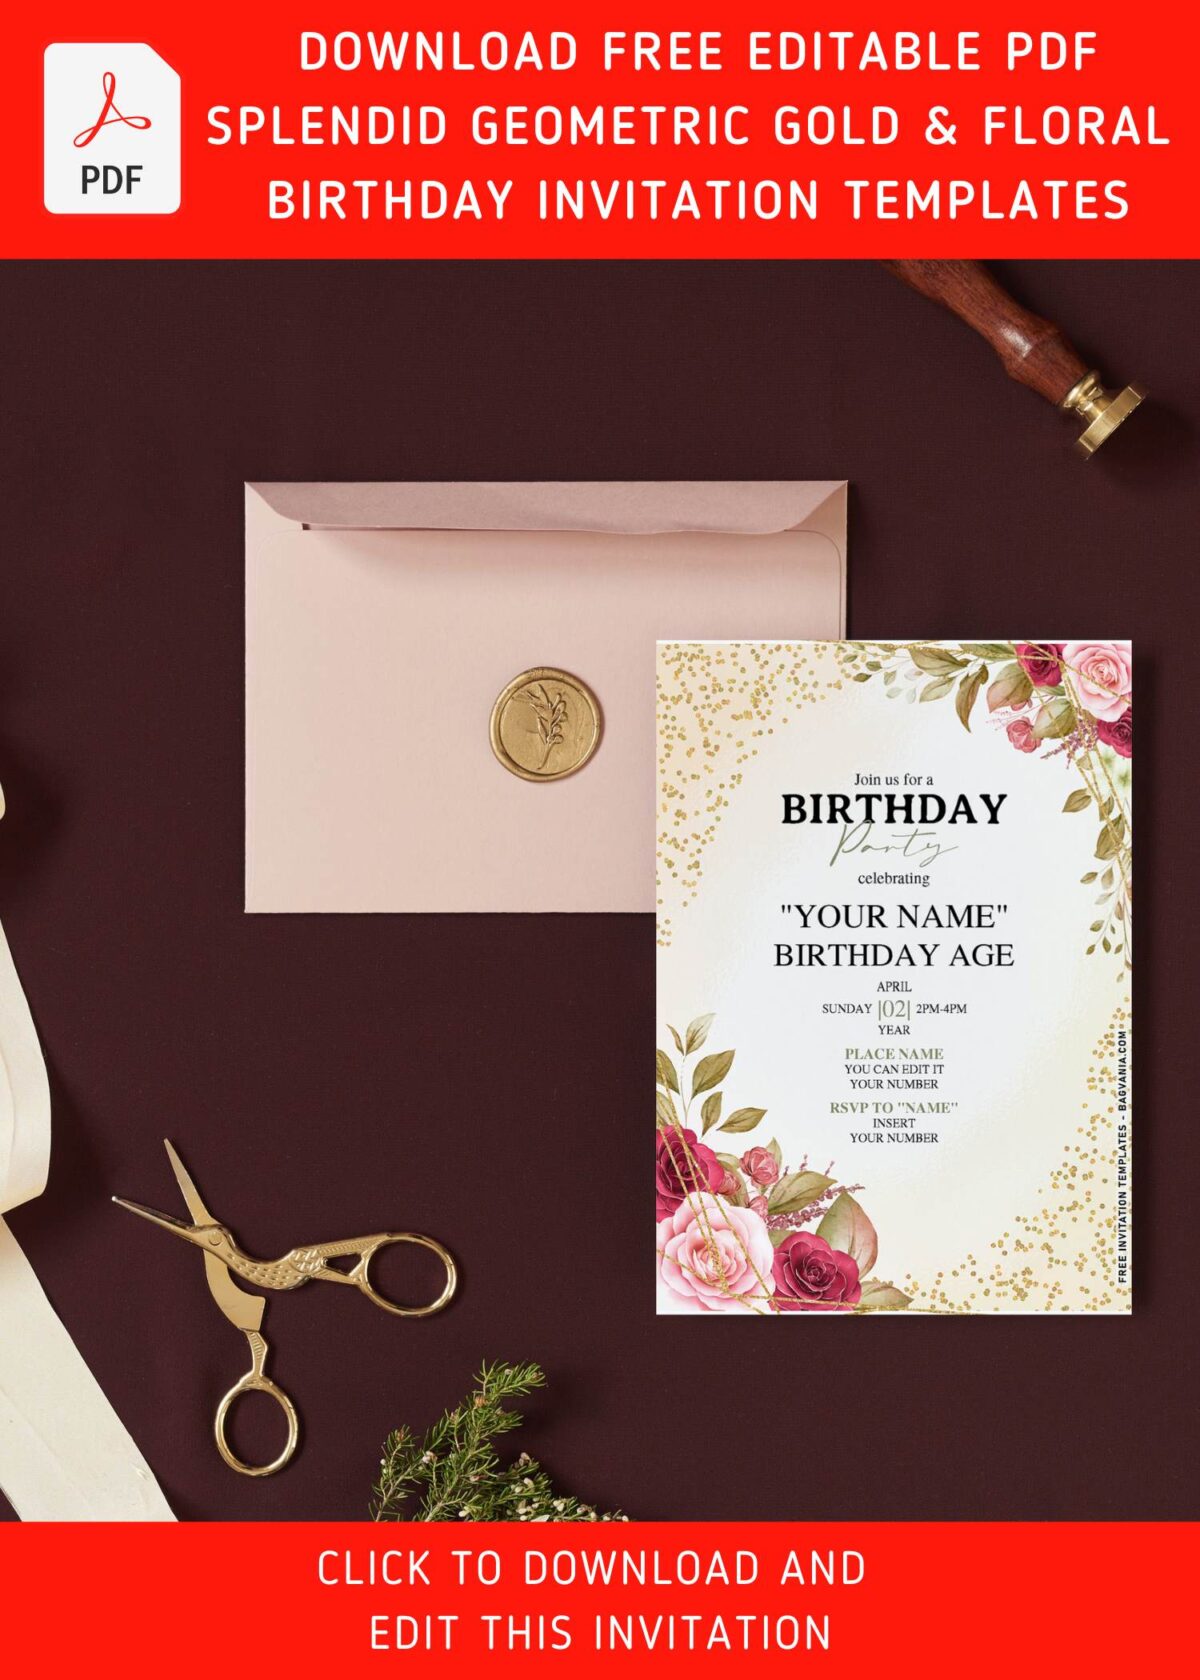 (Free Editable PDF) Champagne Gold Glitter Floral Birthday Invitation Templates with romantic red rose